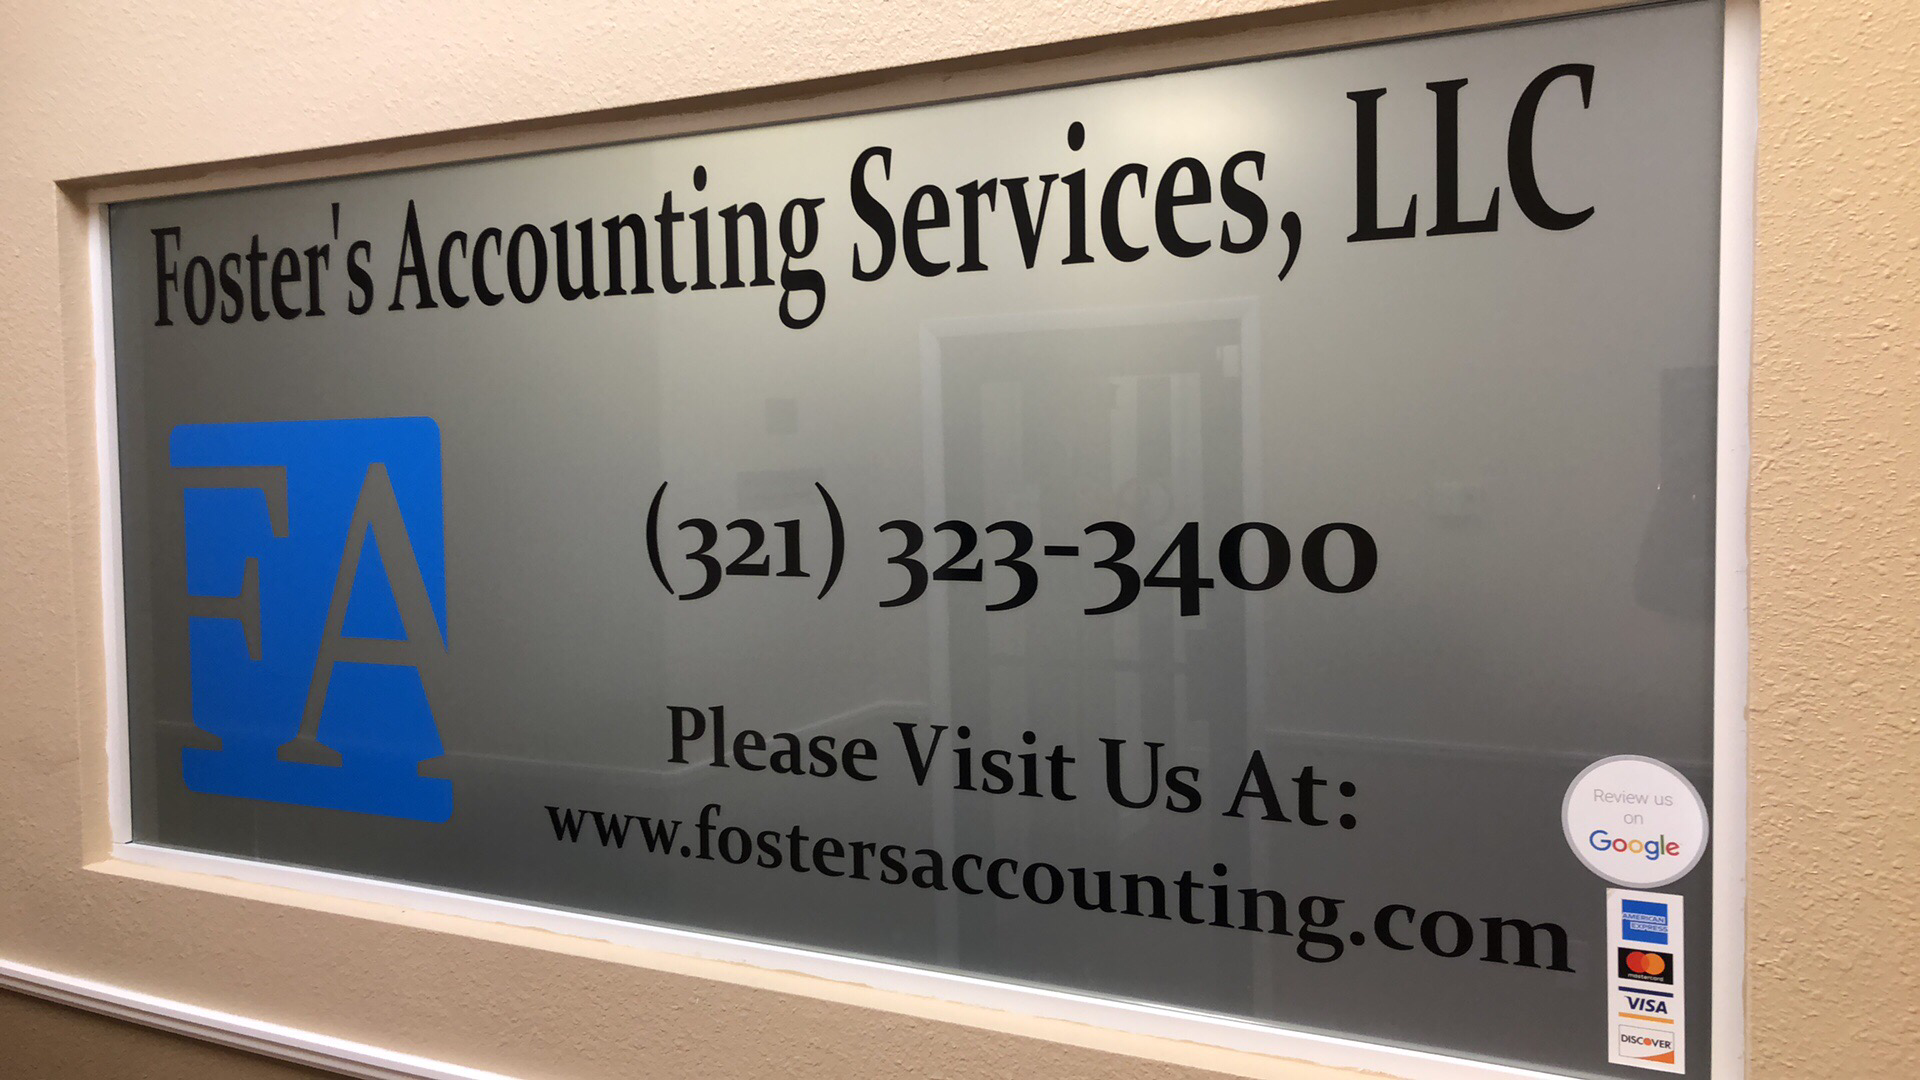 Foster's Accounting Services